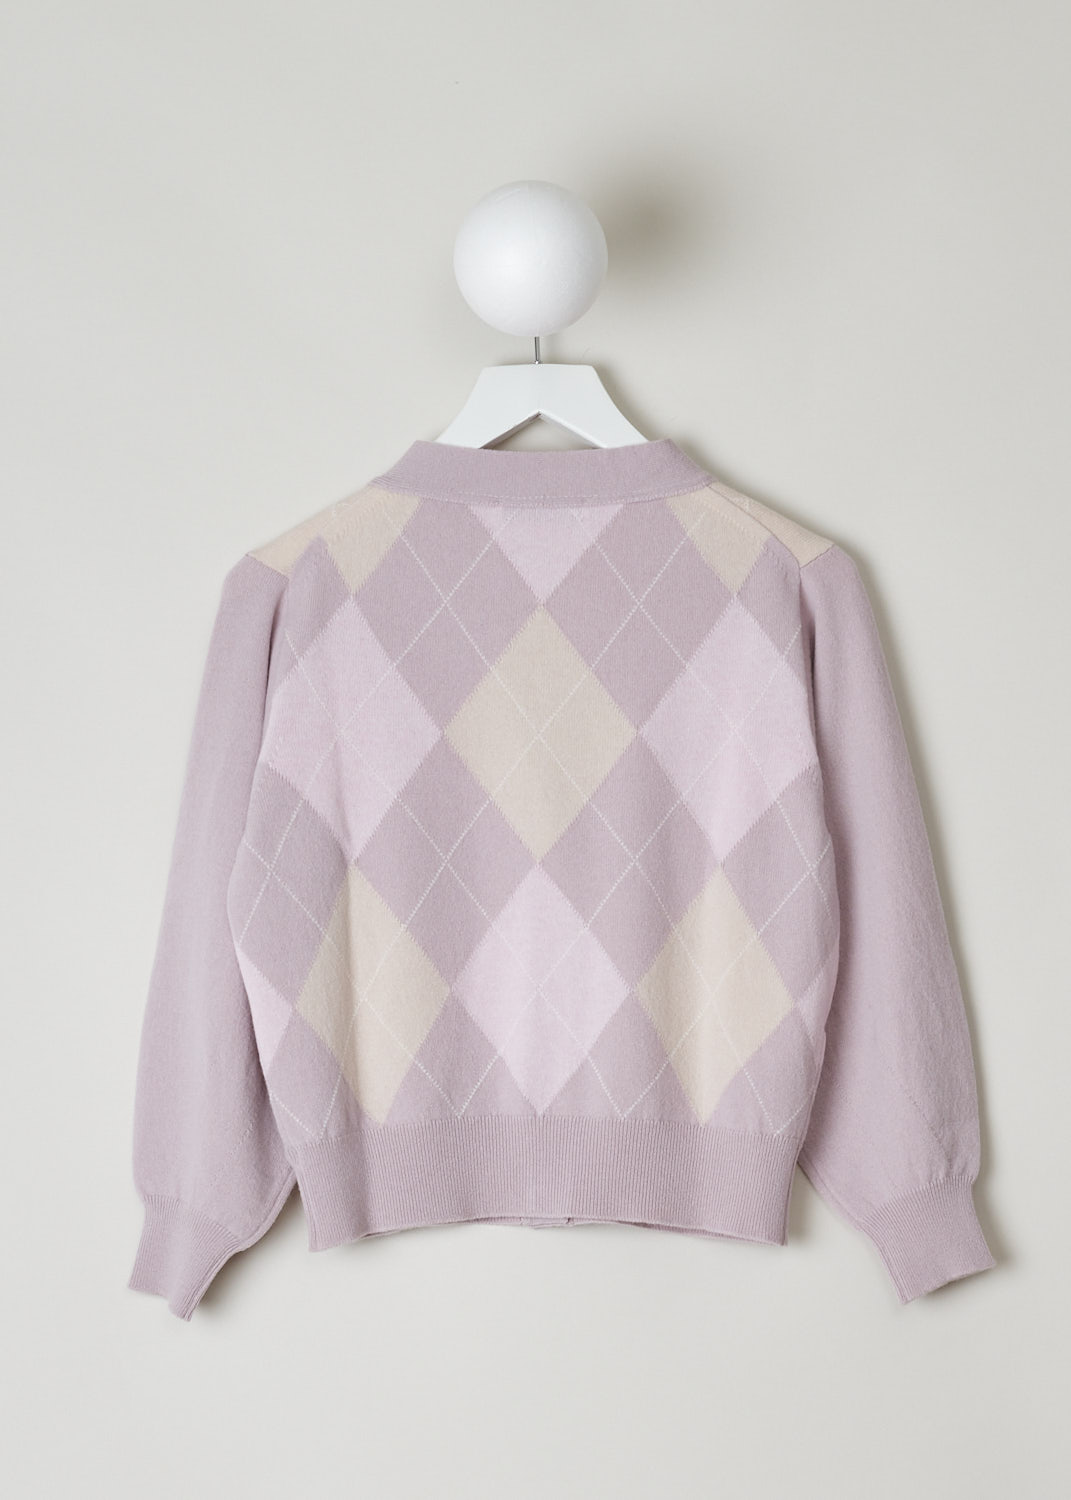 PRINGLE OF SCOTLAND, POWDER PINK ARGYLE CARDIGAN, PWB829_TZB2_POWDER_PIN, Pink, Print, Back, This powder pink argyle cardigan has a V-shaped neckline and a front button closure. The cuffs and hemline have a ribbed finish. The cardigan has a cropped length. 
